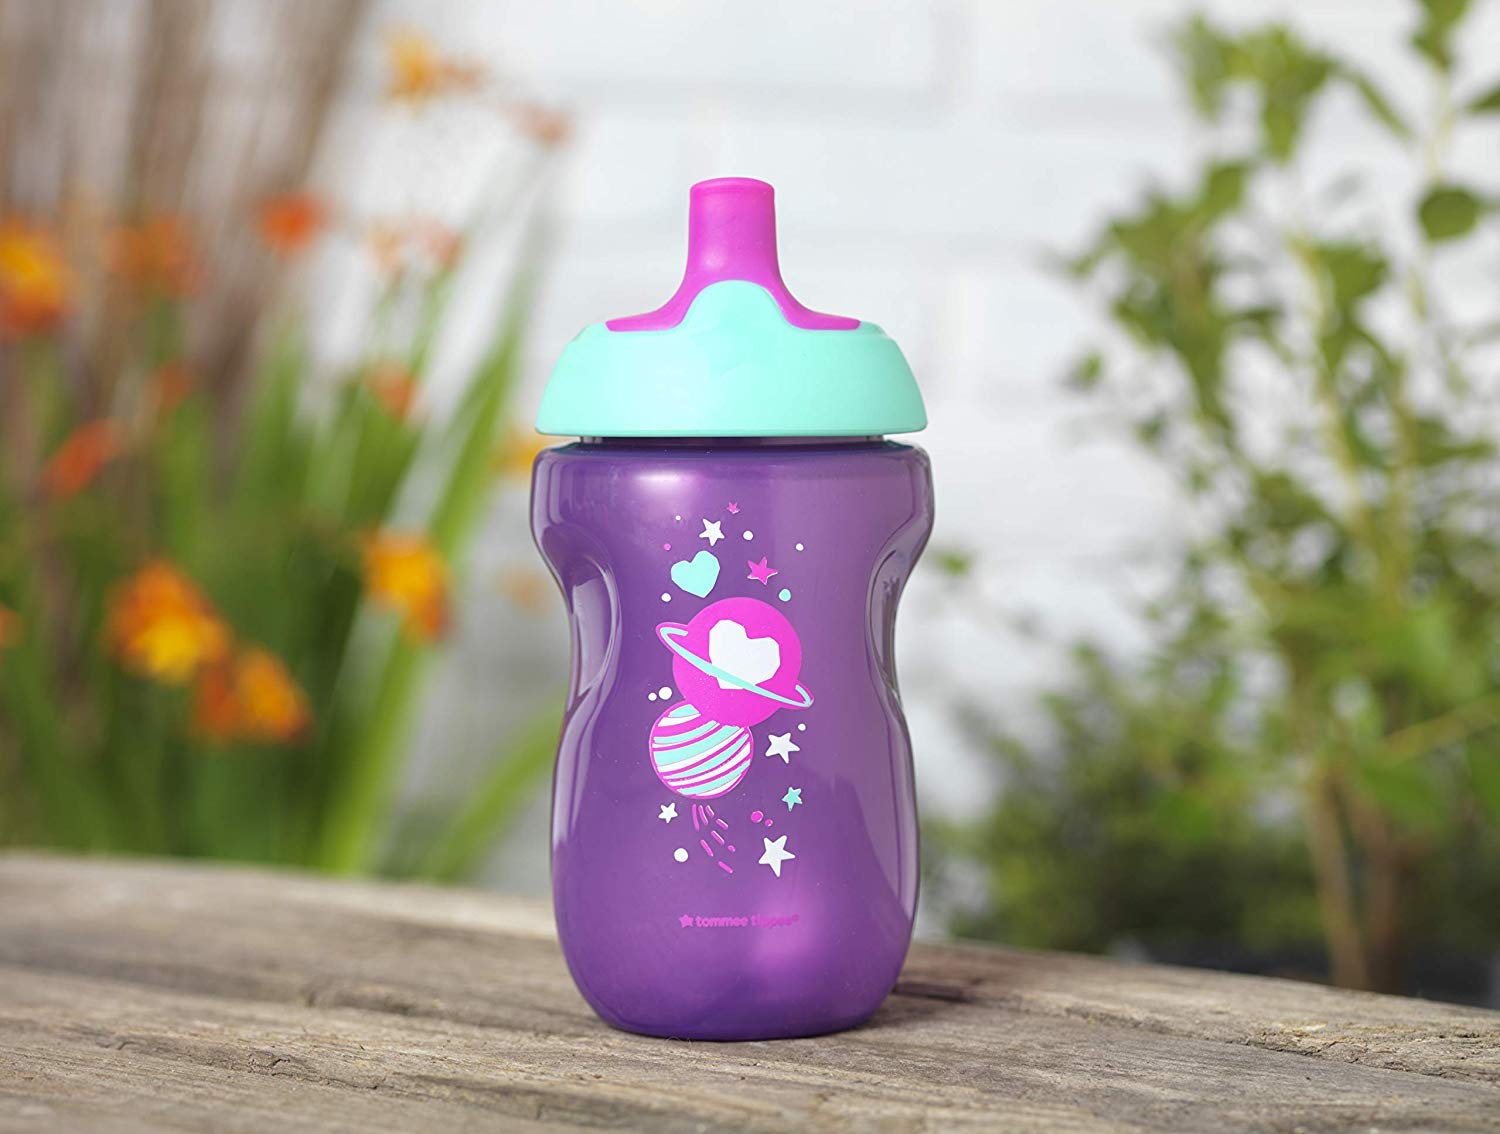 Tommee Tippee Active 12 Month Plus Sports Bottle, Blue, 3-Piece